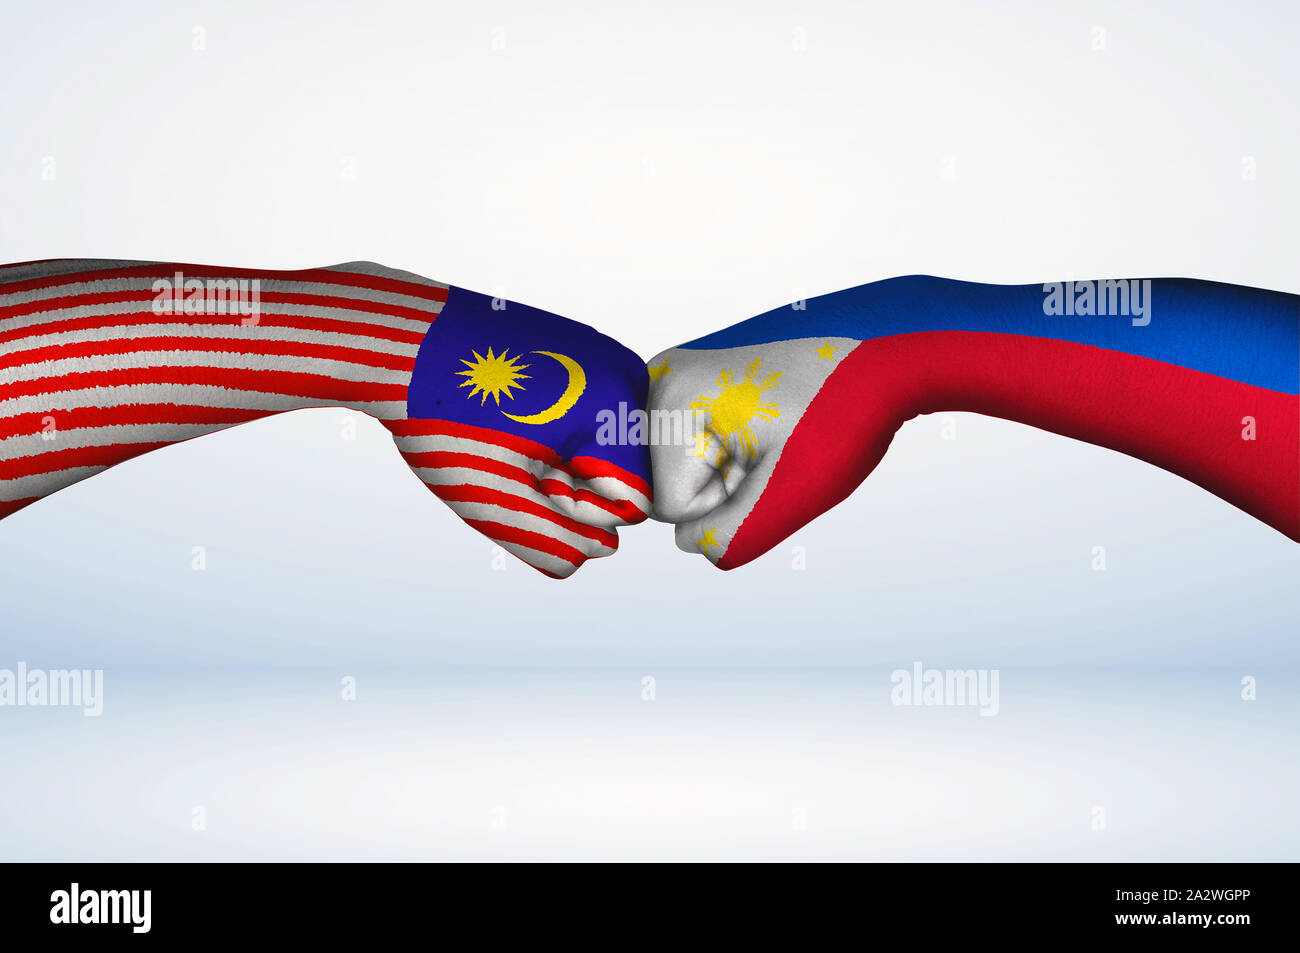 Fist bump of Malaysian and Filipino  flags. Two hands with painted flags of Malaysia and Philippines Flag fist bumping as a symbol of unity. Stock Photo